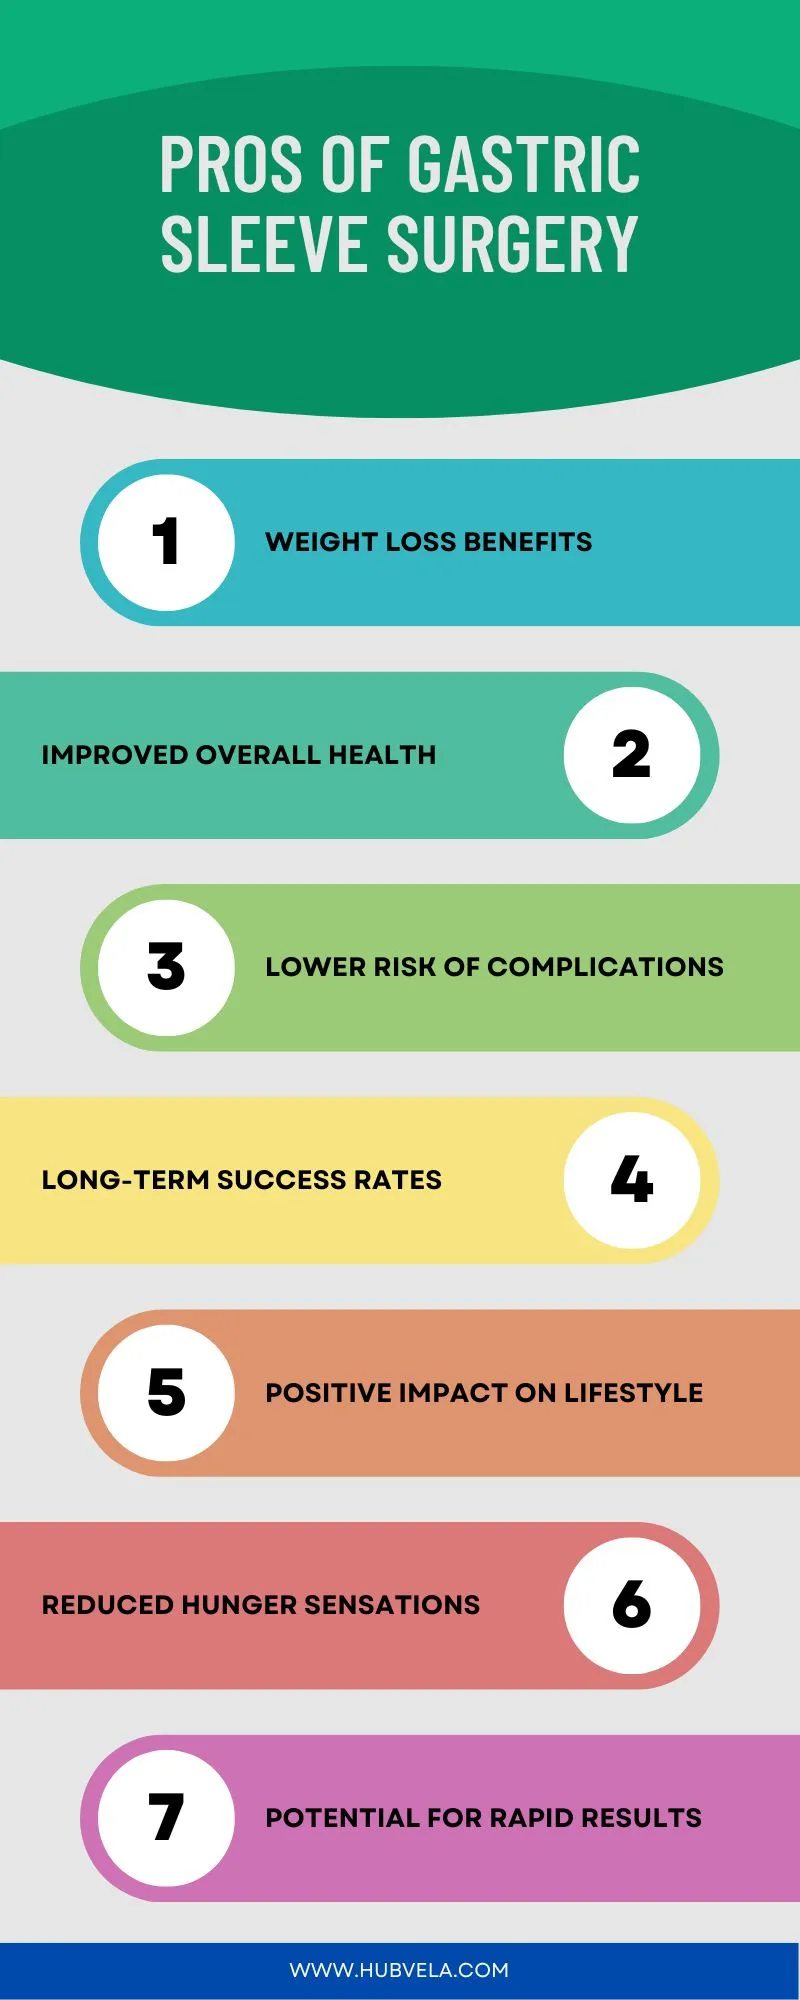 Pros Of Gastric Sleeve Surgery Infographic